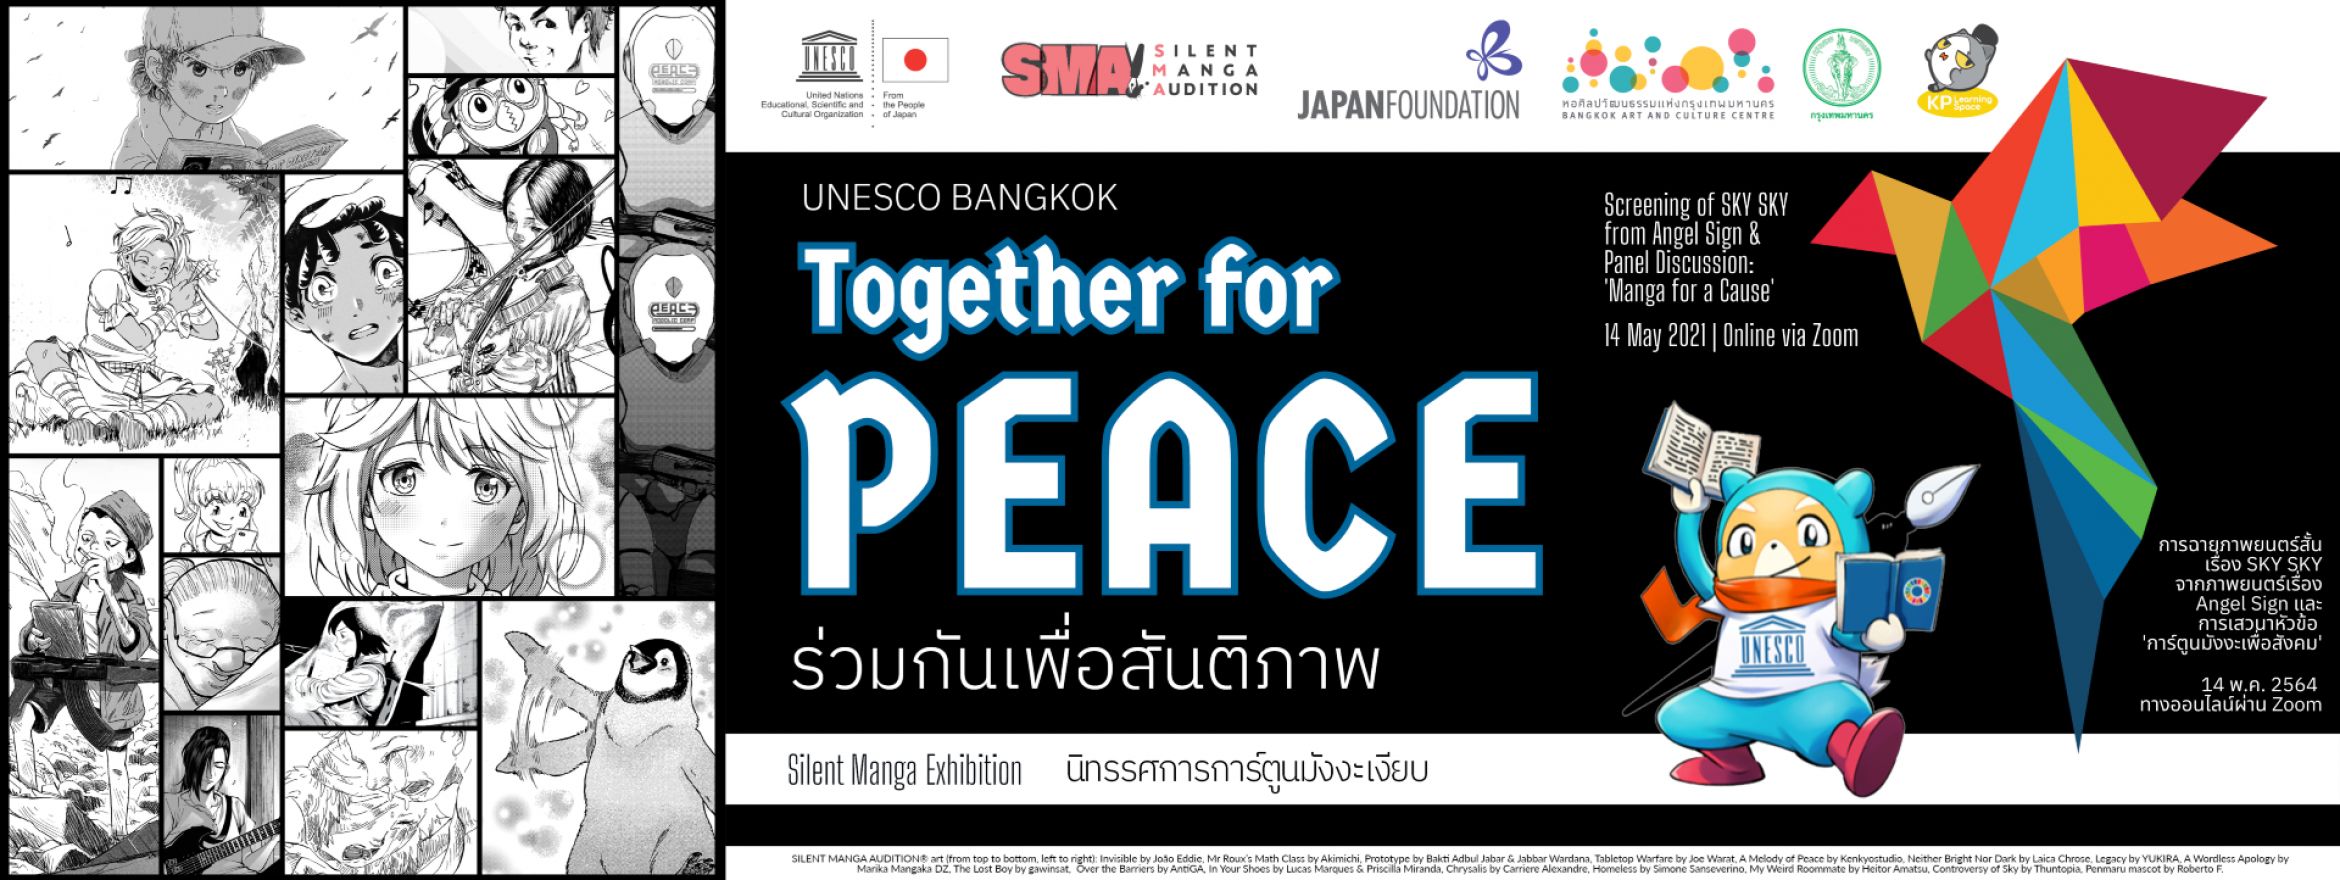 Together for Peace Silent Manga Exhibition and Special Event